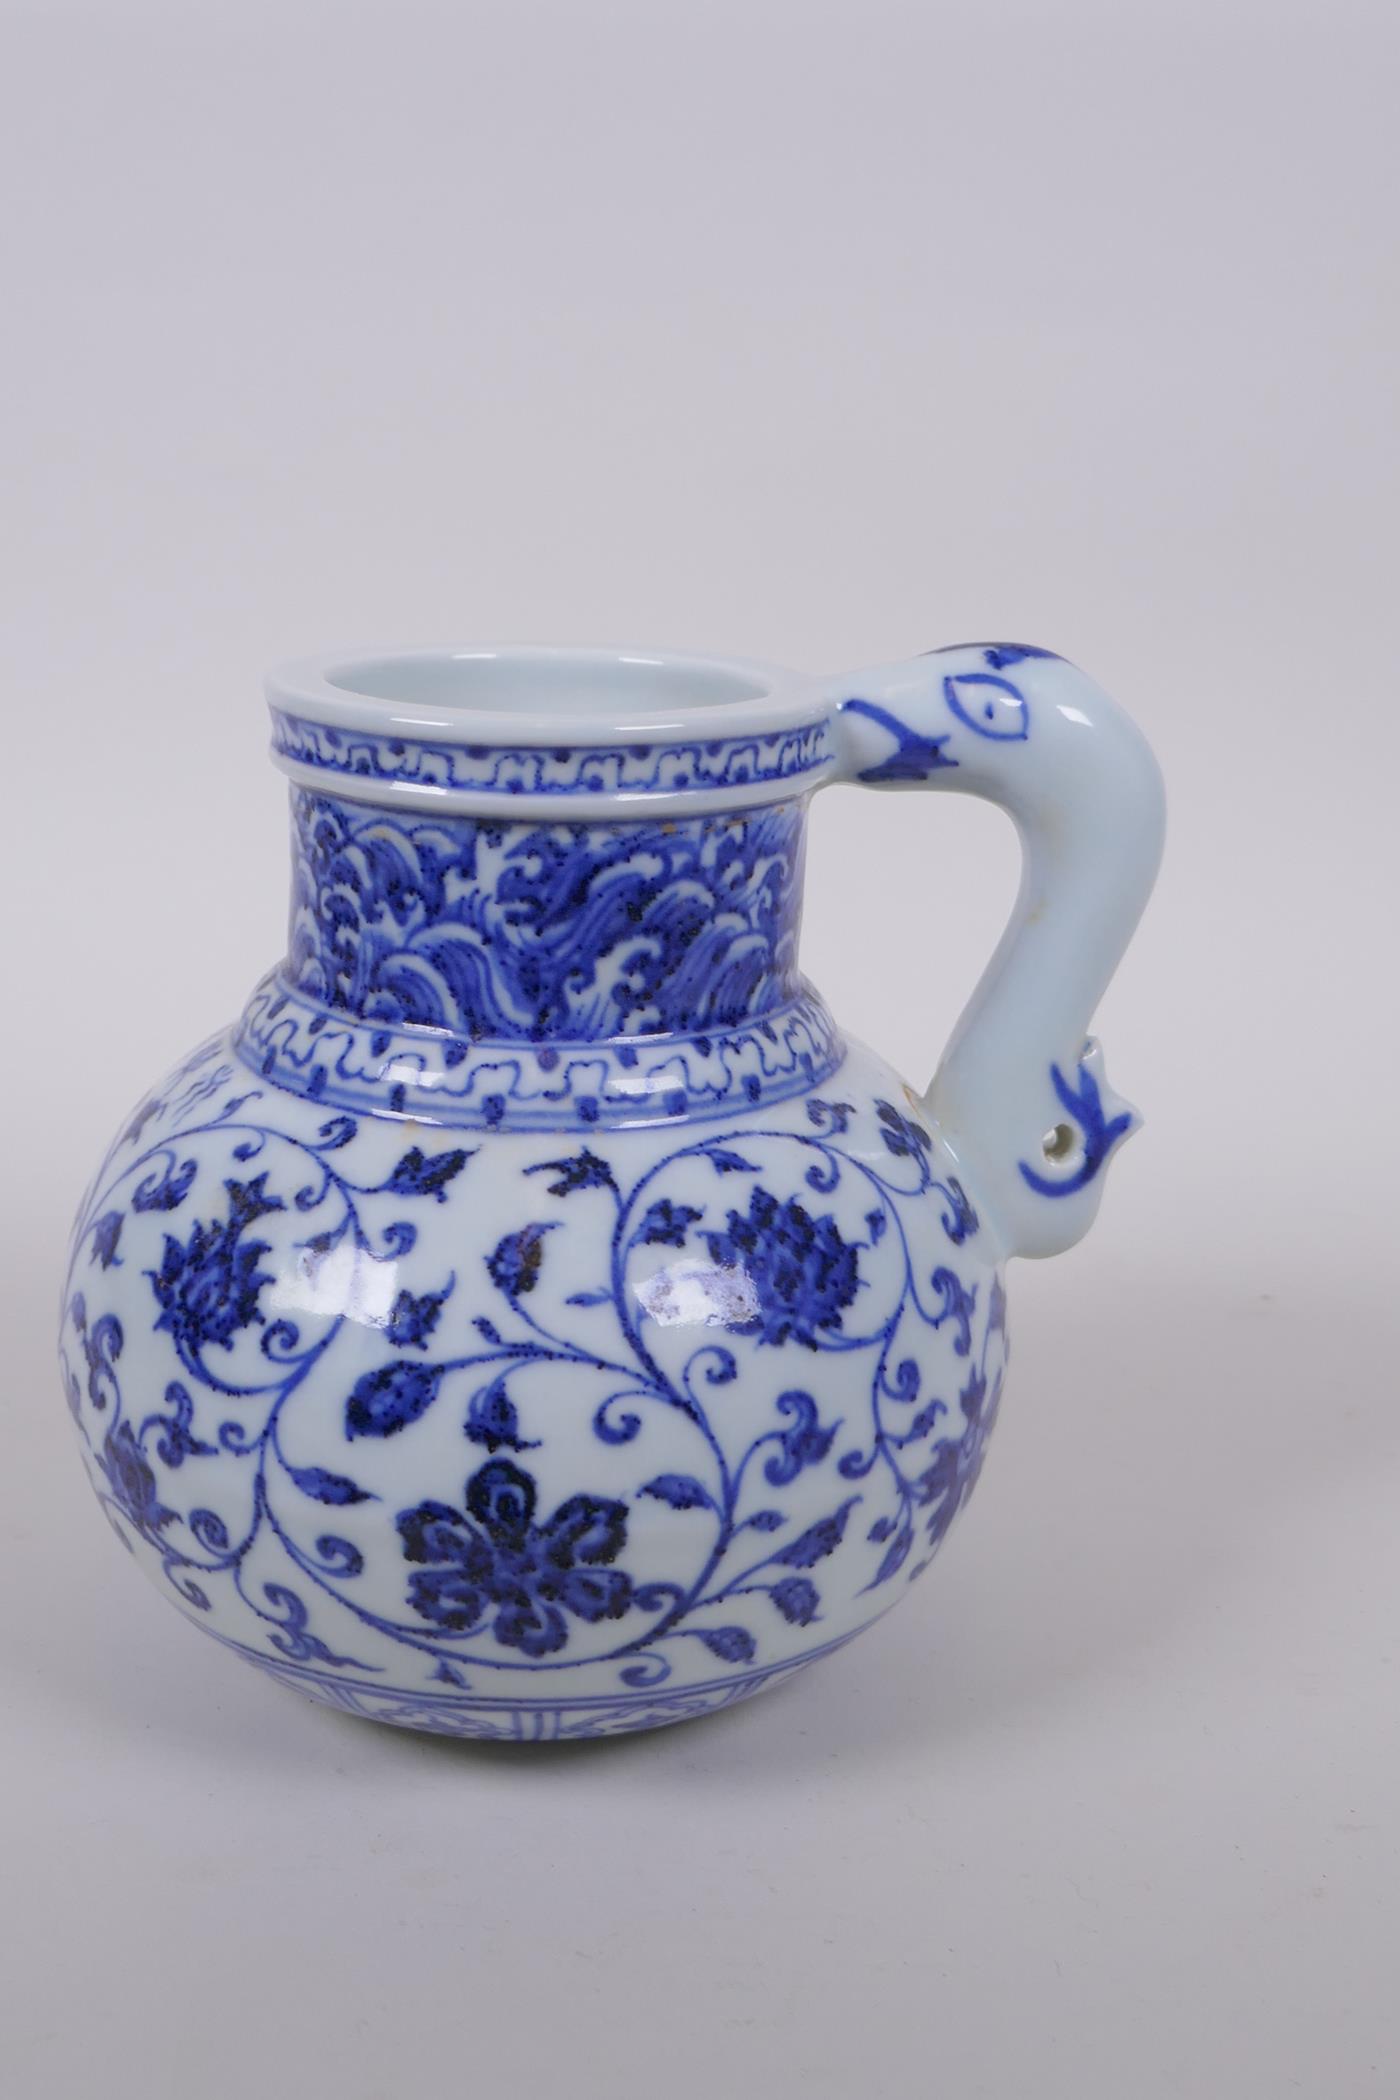 A Chinese blue and white porcelain wine jar with scrolling lotus flower decoration, 4 character mark - Image 4 of 5